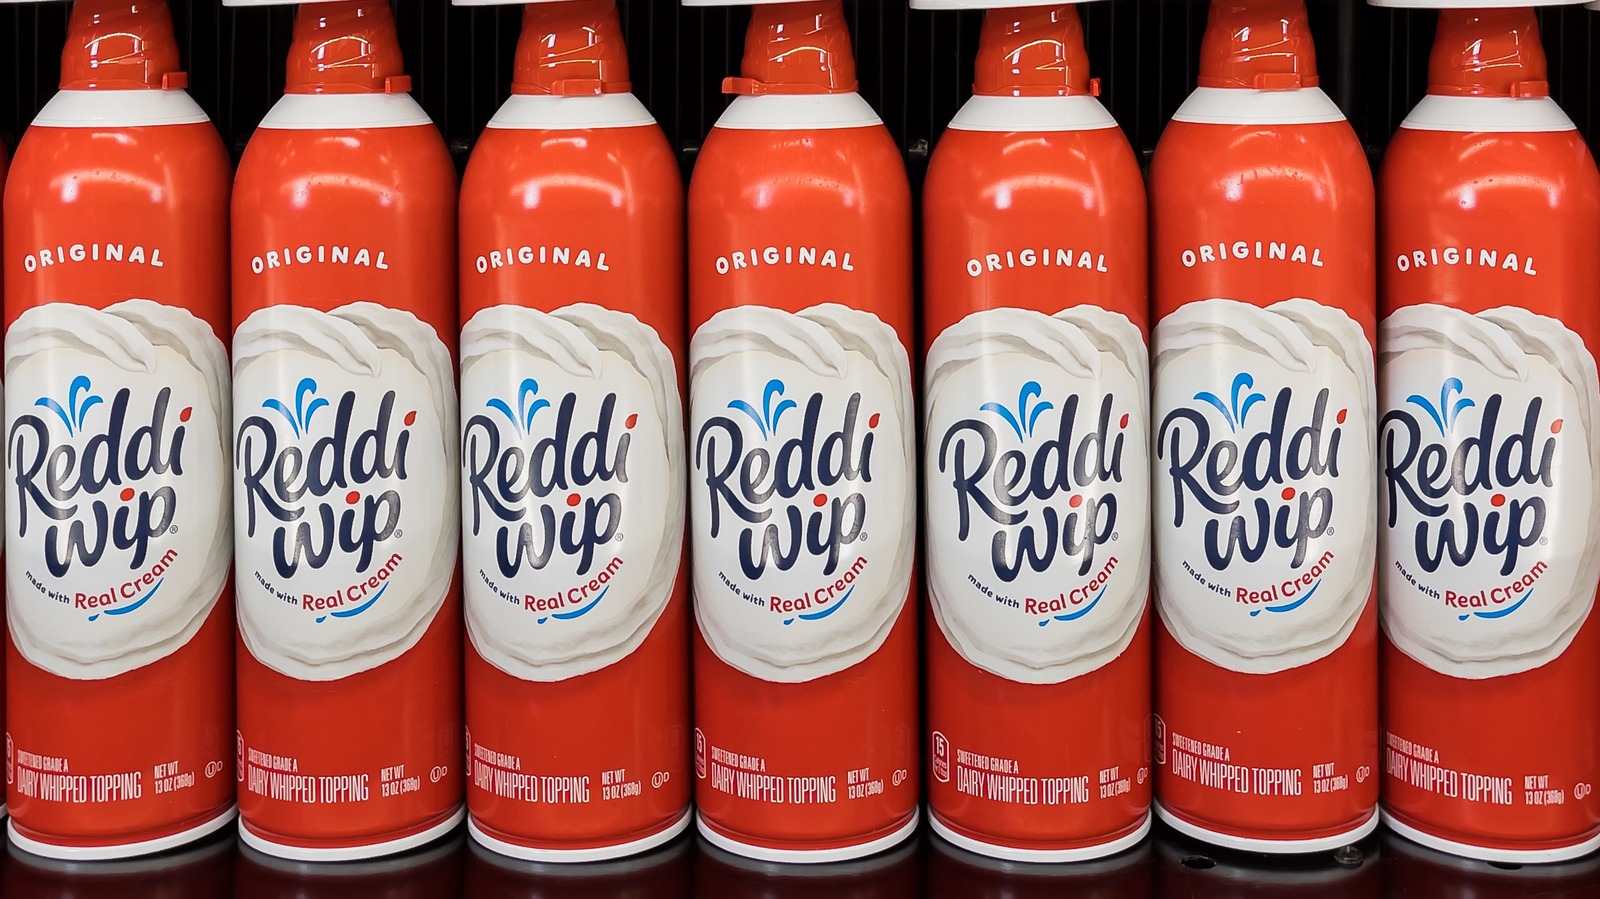 Reddi-wip's New Canned Foam Lets You Make Fancy Coffee Drinks at Home